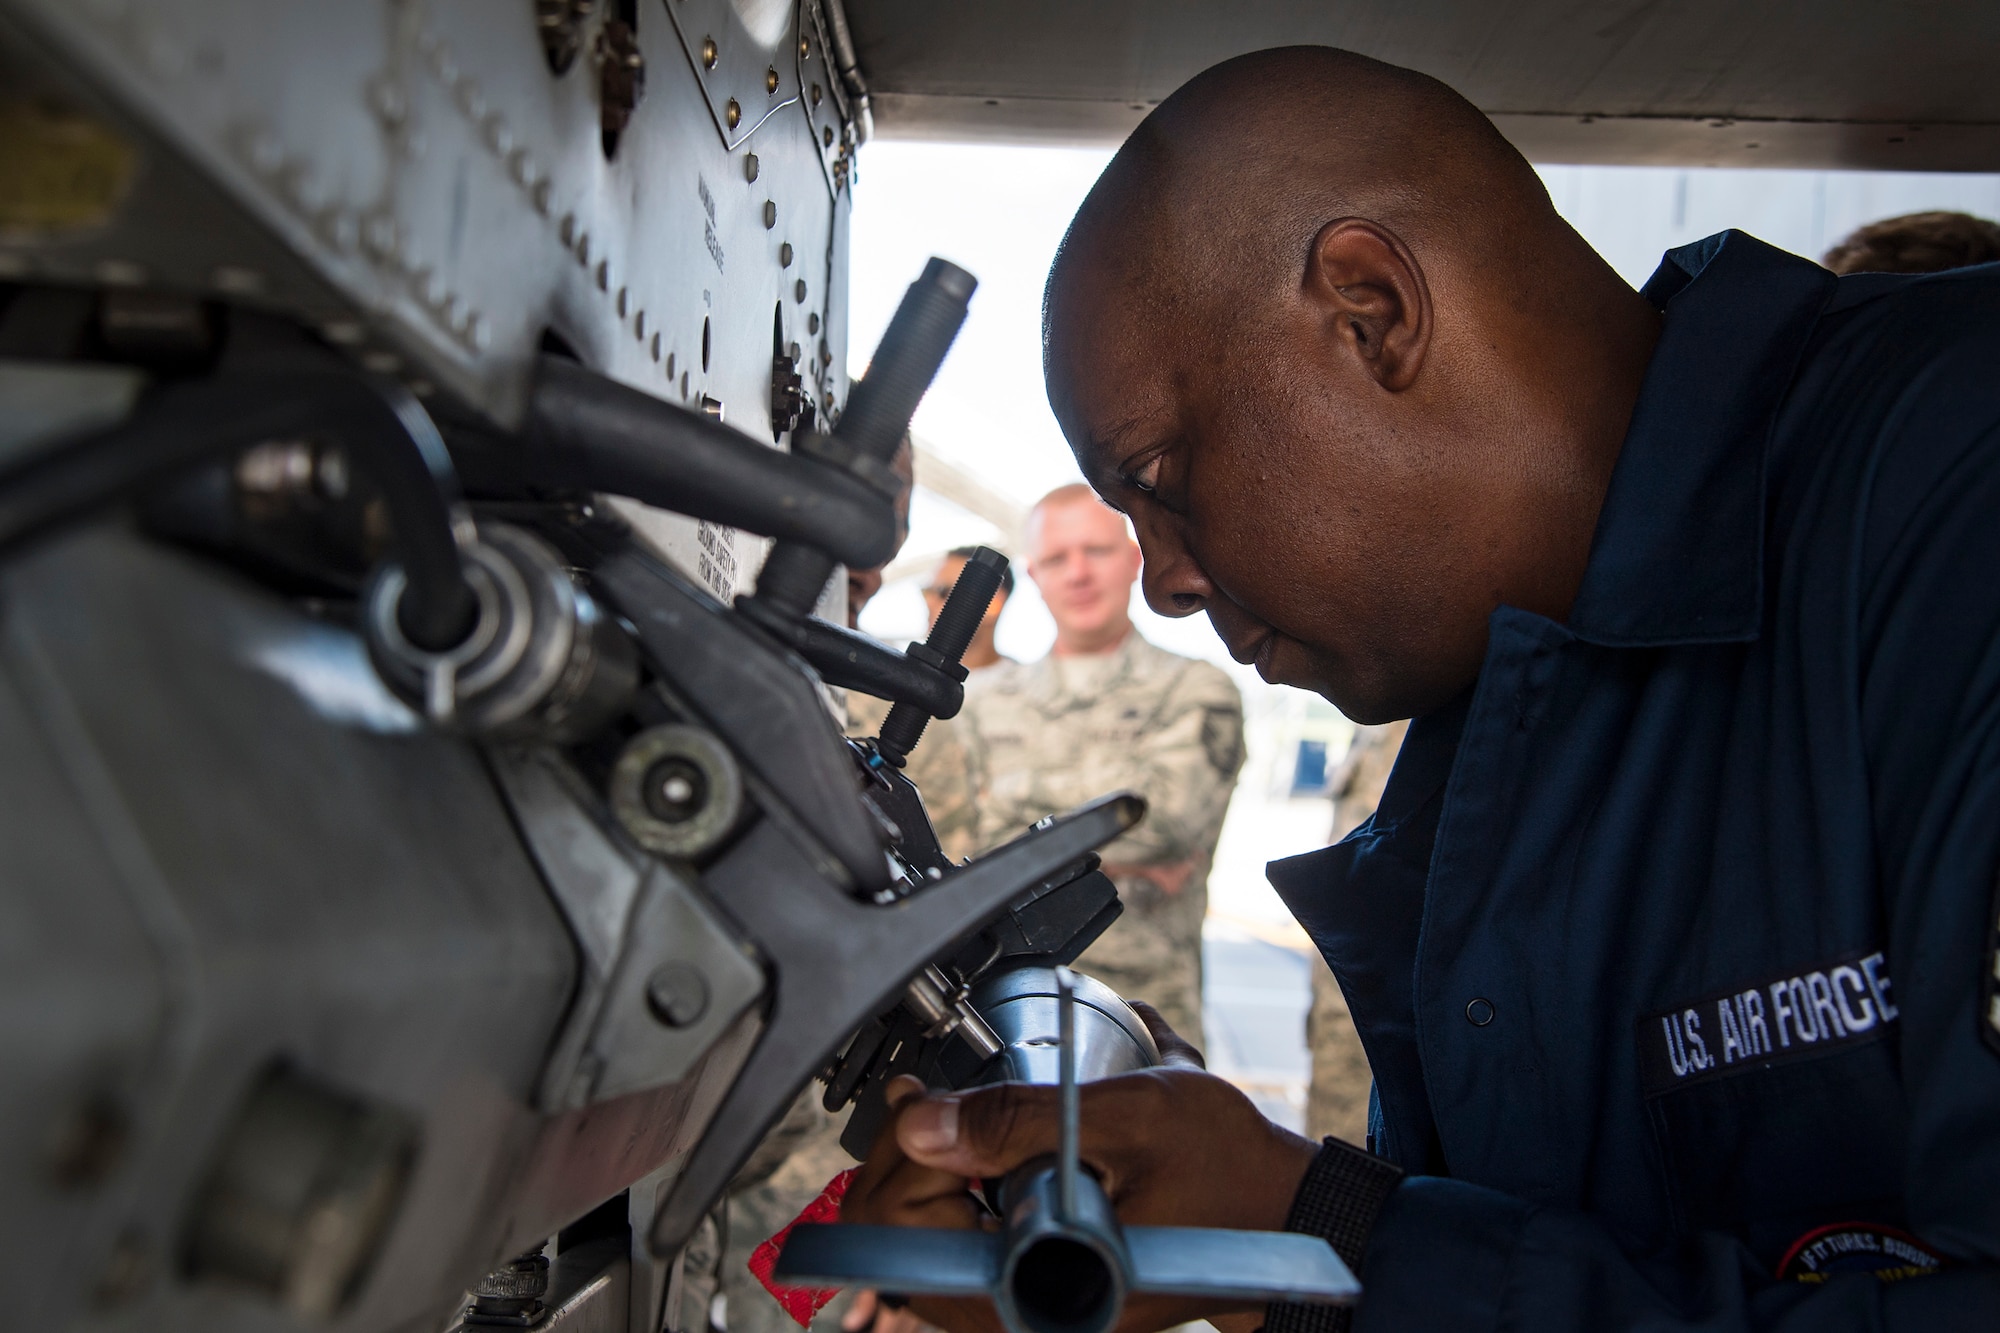 Chief Master Sgt. James Allen, 23d Wing command chief, attempts to install a BDU-33 practice bomb onto an A-10C Thunderbolt II during an immersion tour, July 10, 2018, at Moody Air Force Base, Ga. Allen toured the 23d Aircraft Maintenance Squadron (AMXS) to build rapport and experience the day to day operations of maintenance Airmen. Throughout his visit, Allen was able to speak with Airmen and hear their opinions and ideas behind the continued success of the AMXS. (U.S. Air Force photo by Airman 1st Class Eugene Oliver)